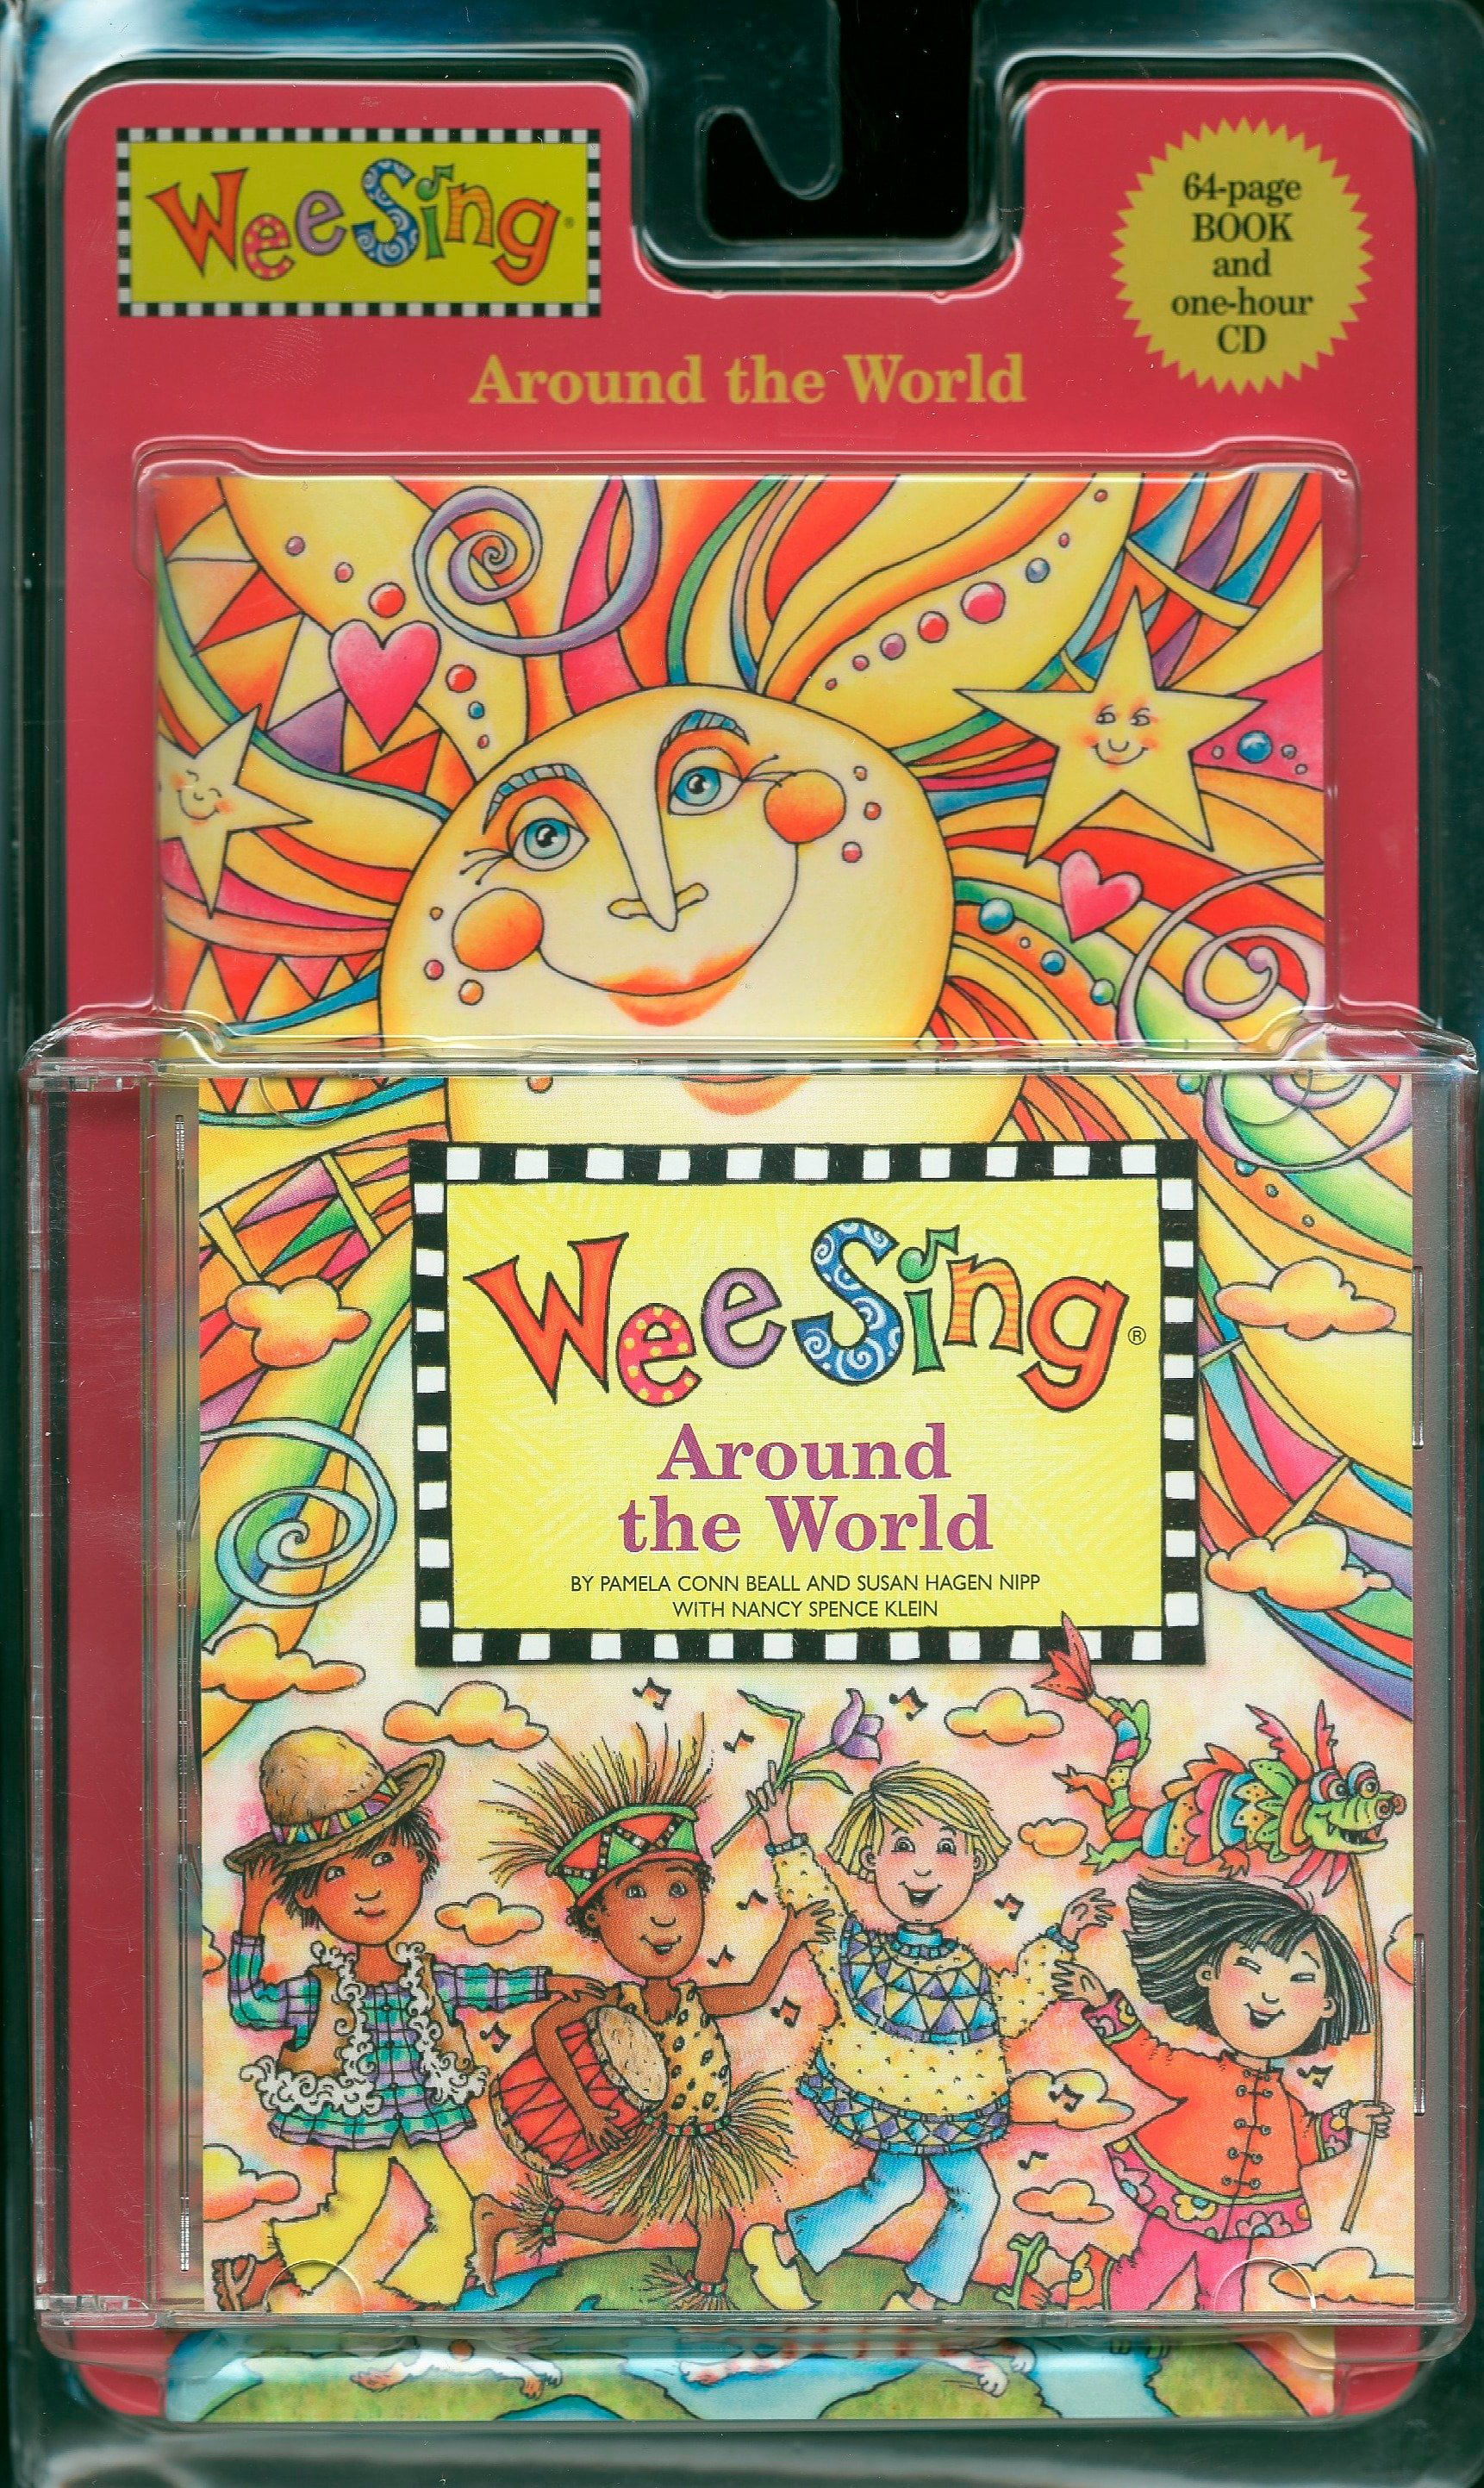 Wee Sing. Wee Sing and move and Audio CD. Wee Sing for Baby and Audio CD. Sing around